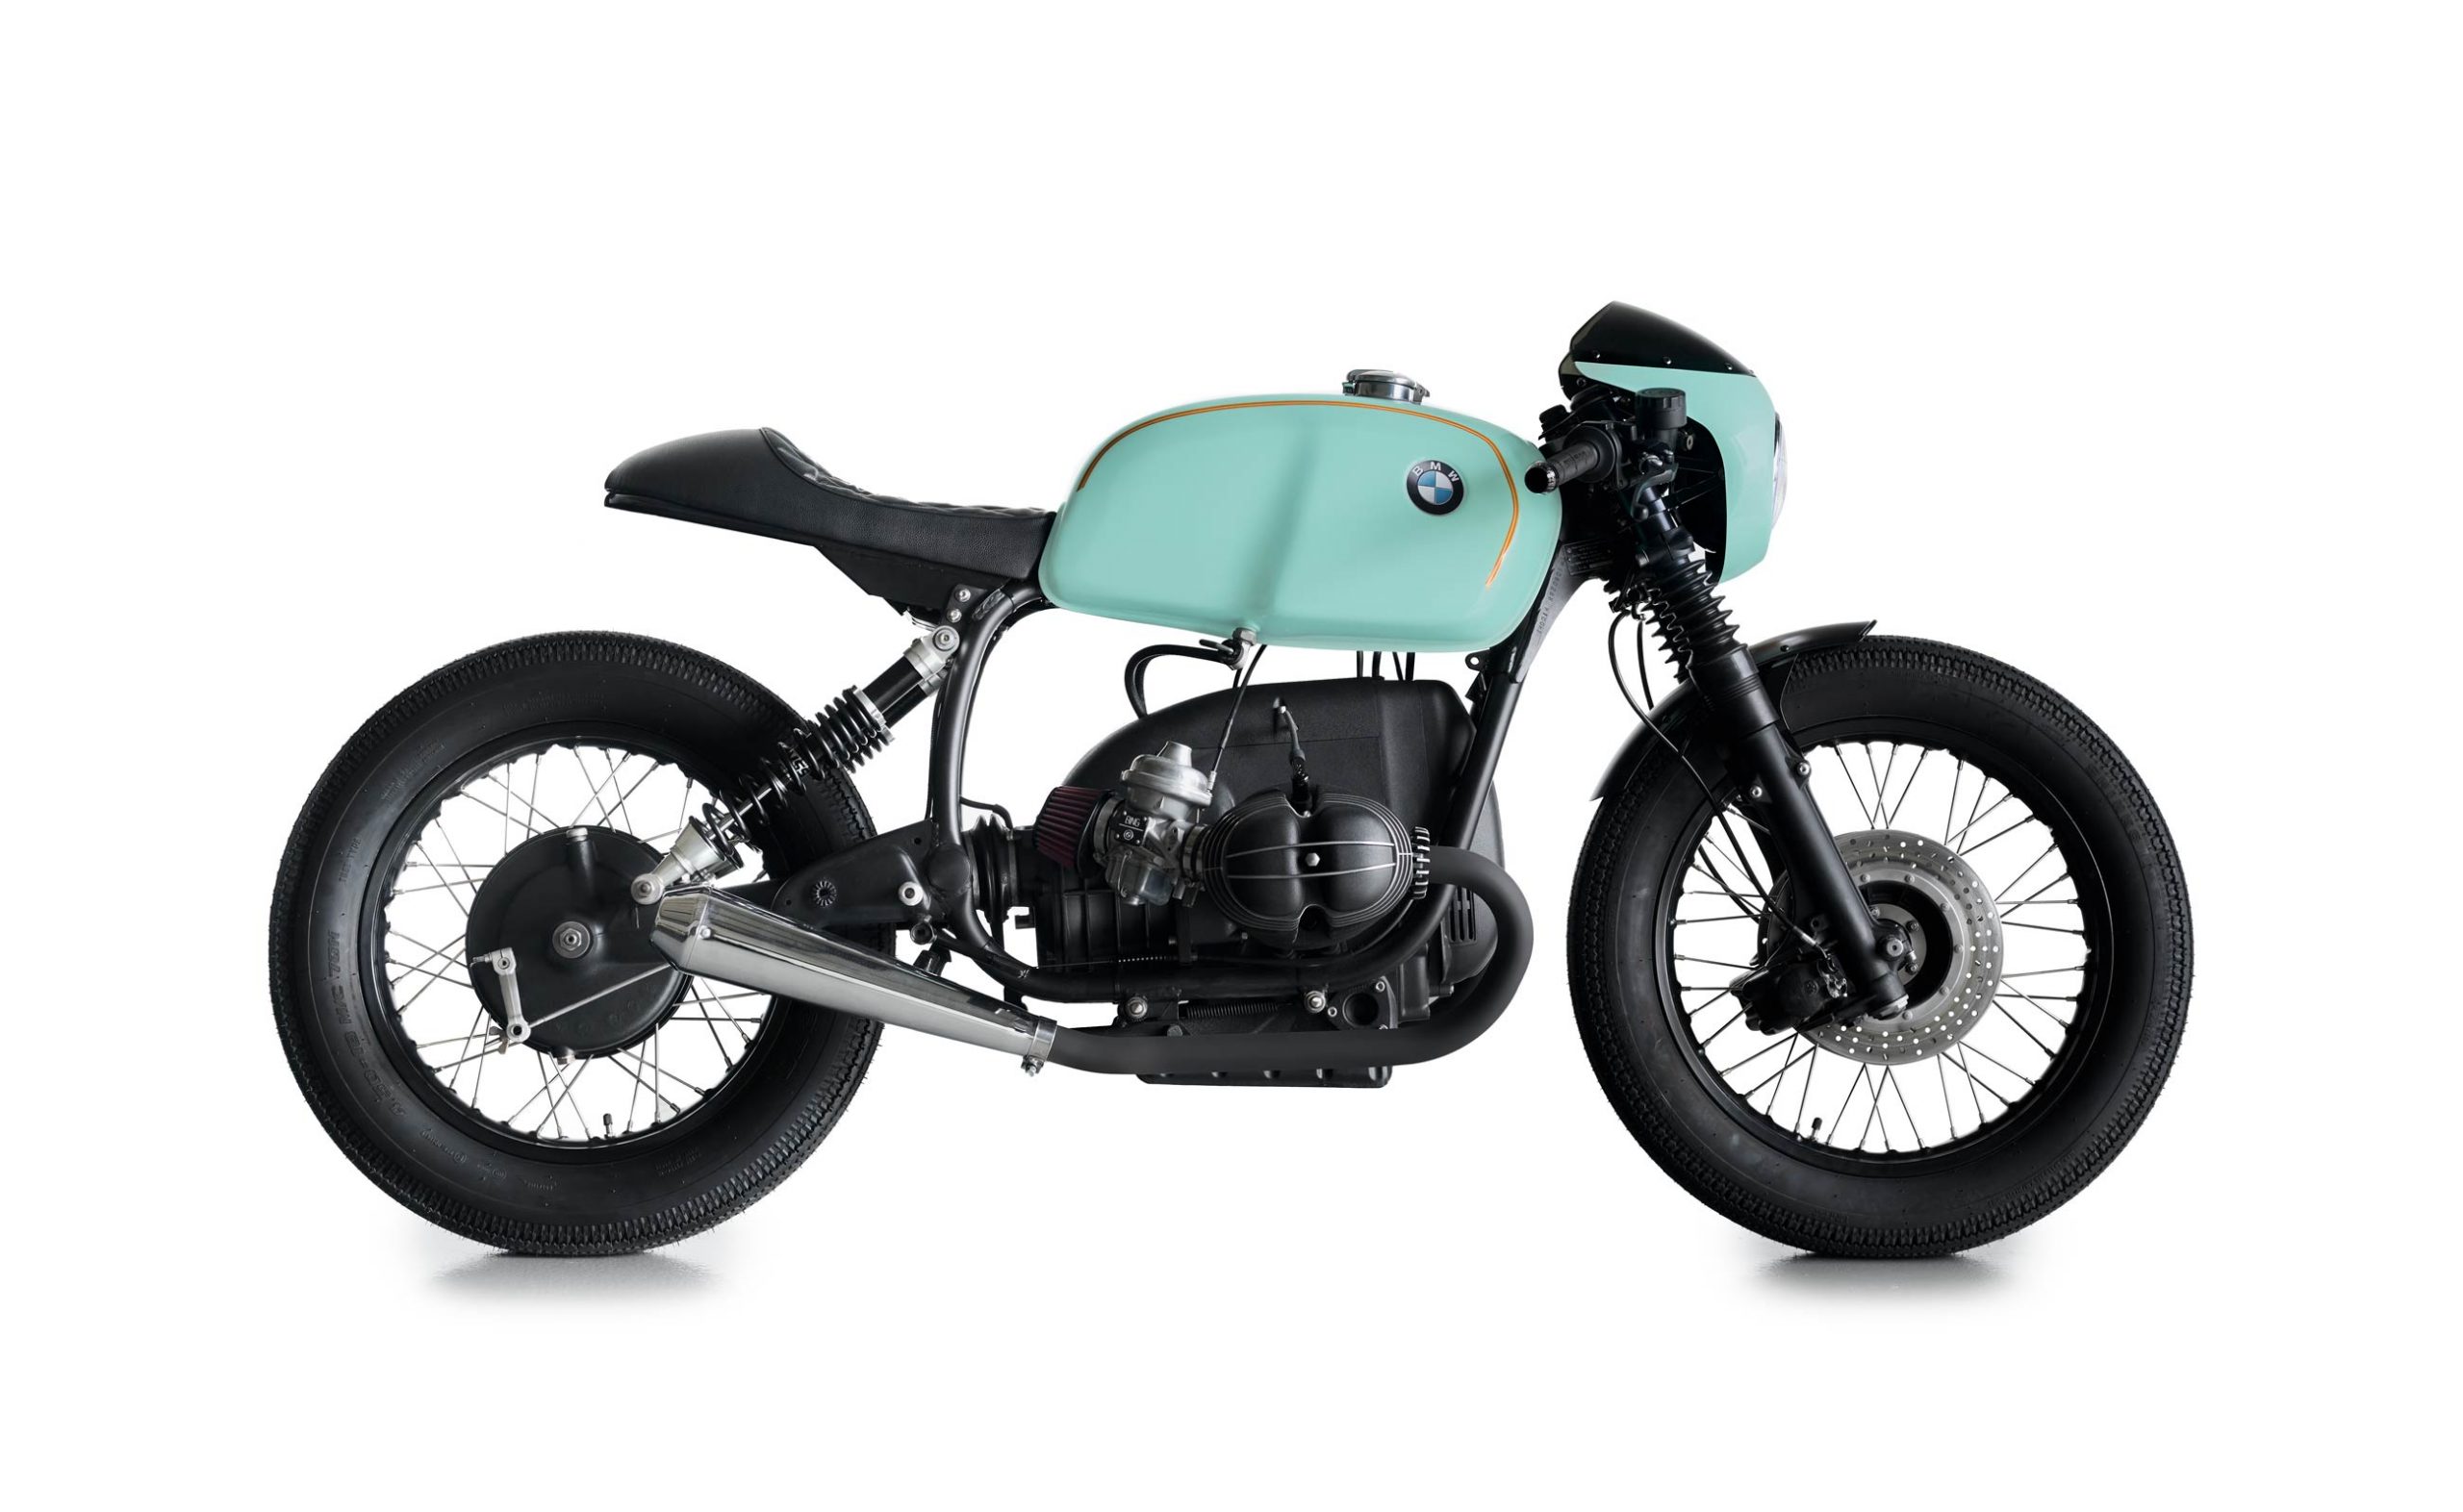 cafe racer BMW R100 RS (Roadsport) Twinshock from 1976 in powder green